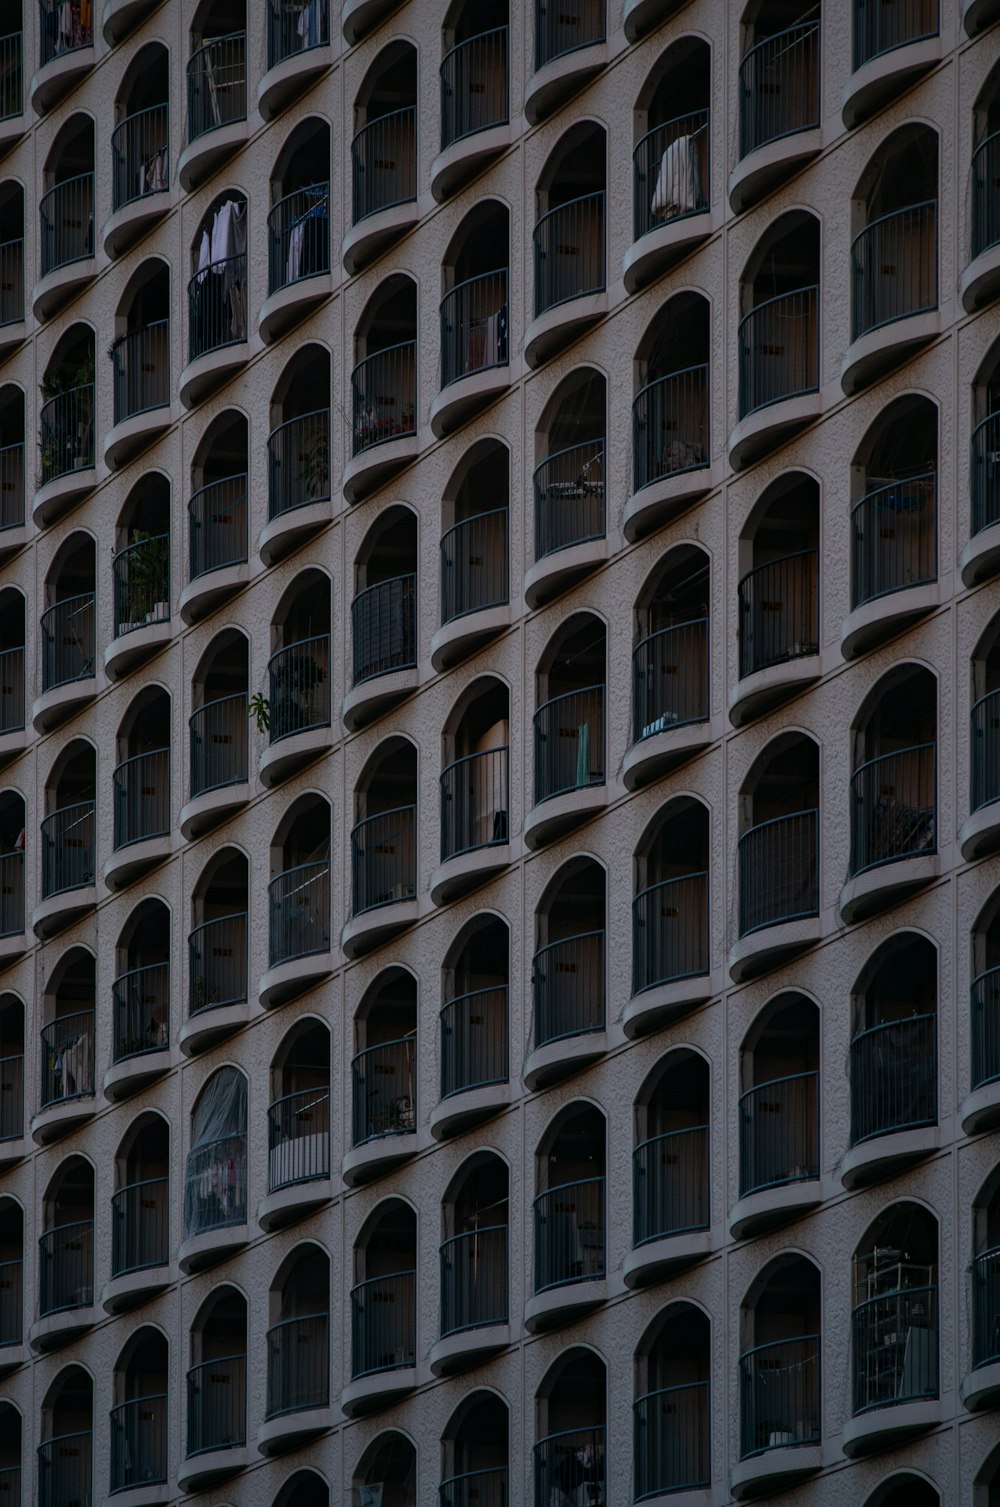 a large building with many windows and balconies